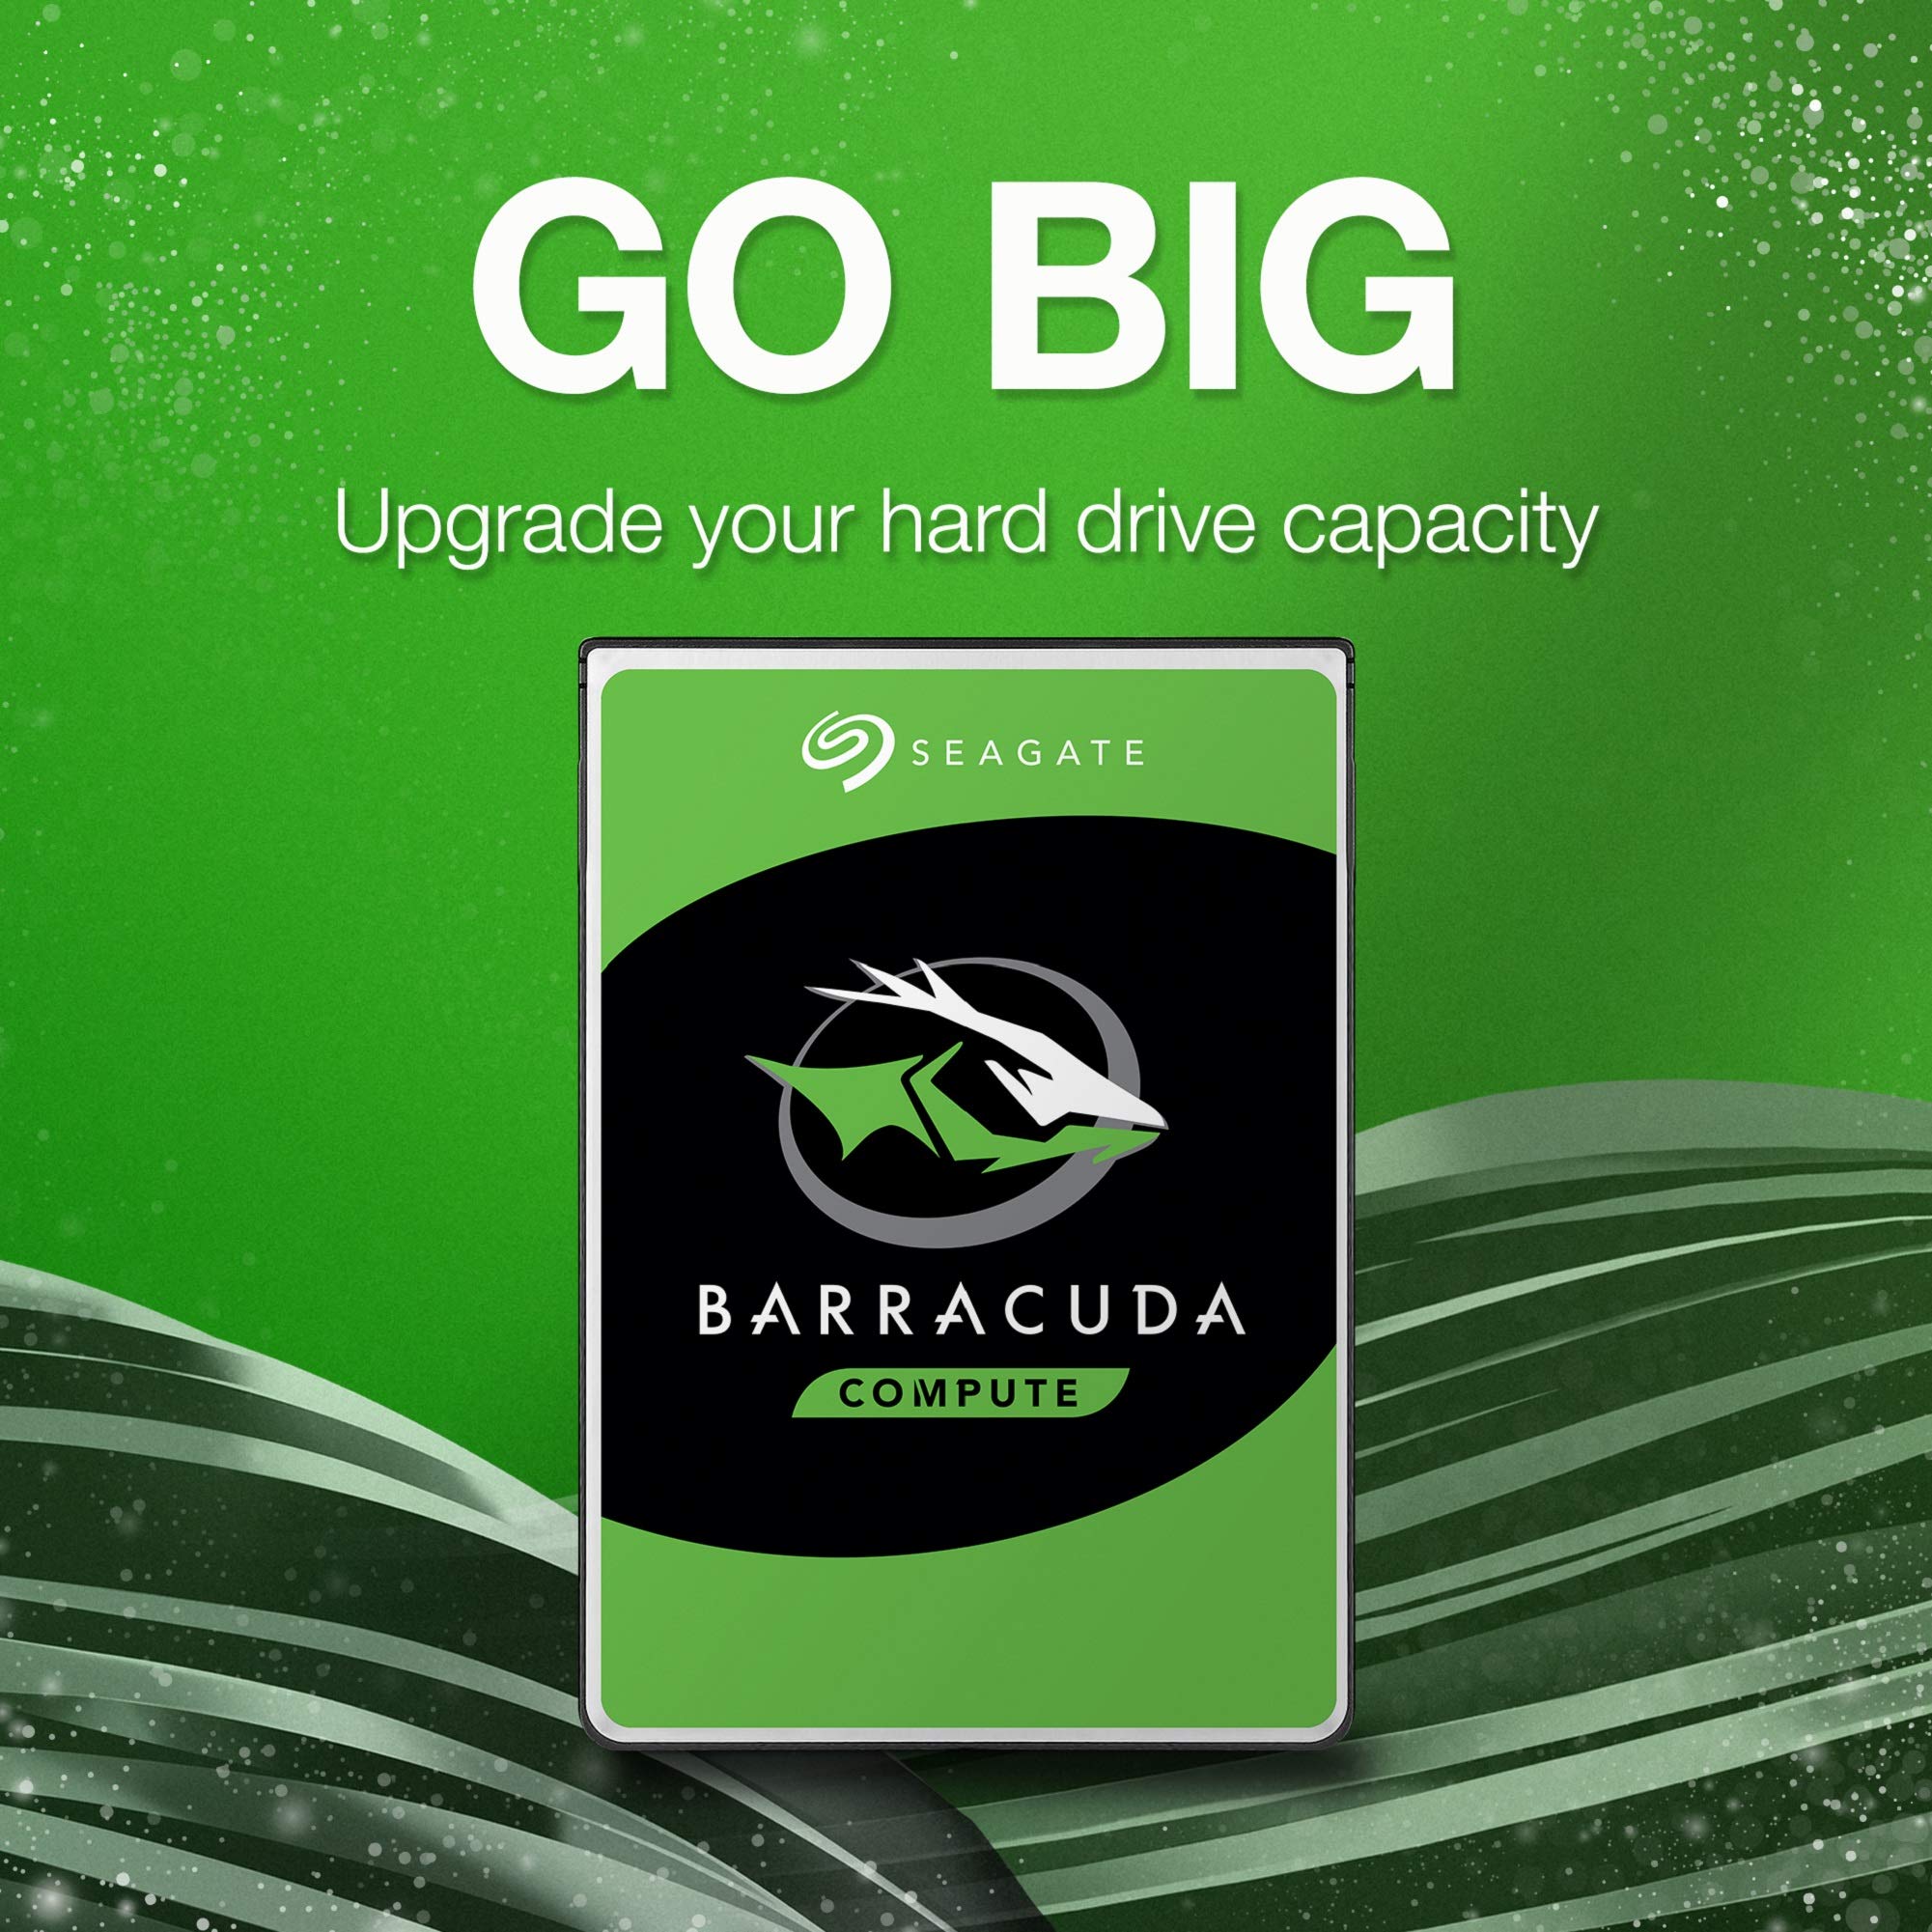 Seagate ST8000DM008 BarraCuda 8TB Internal Hard Drive HDD – 3.5 Inch Sata 6 Gb/s 5400 RPM 256MB Cache for Computer Desktop PC – Frustration Free Packaging (ST8000DM004)